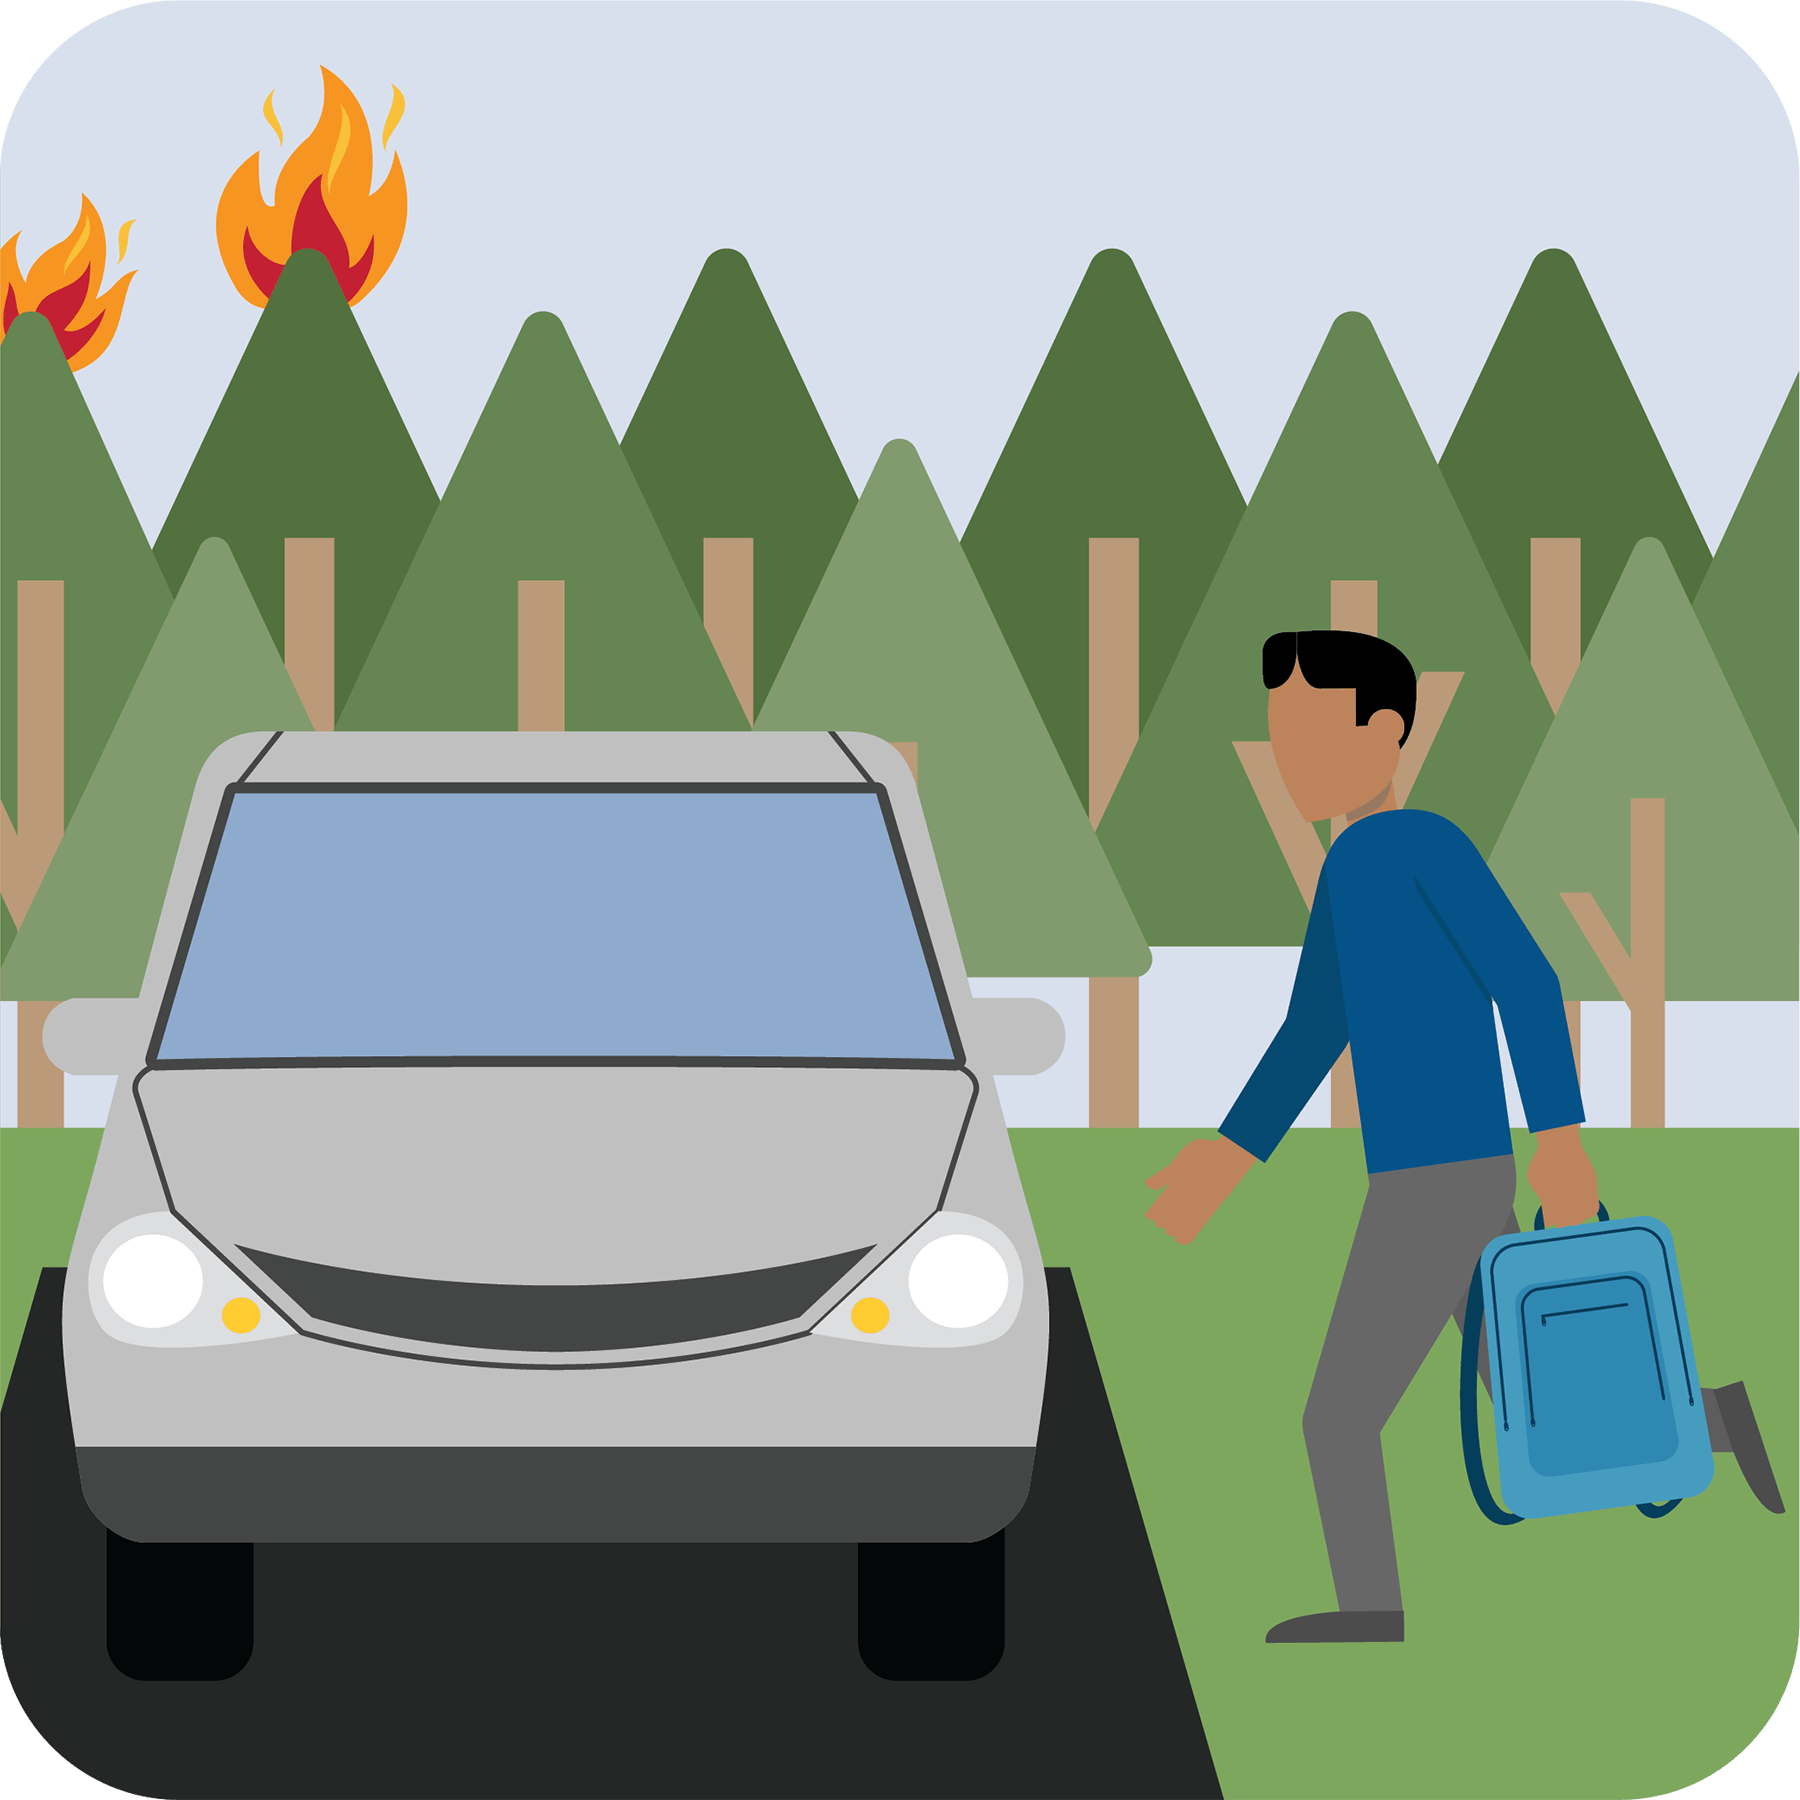 A man getting into his car with a wildfire in the background.